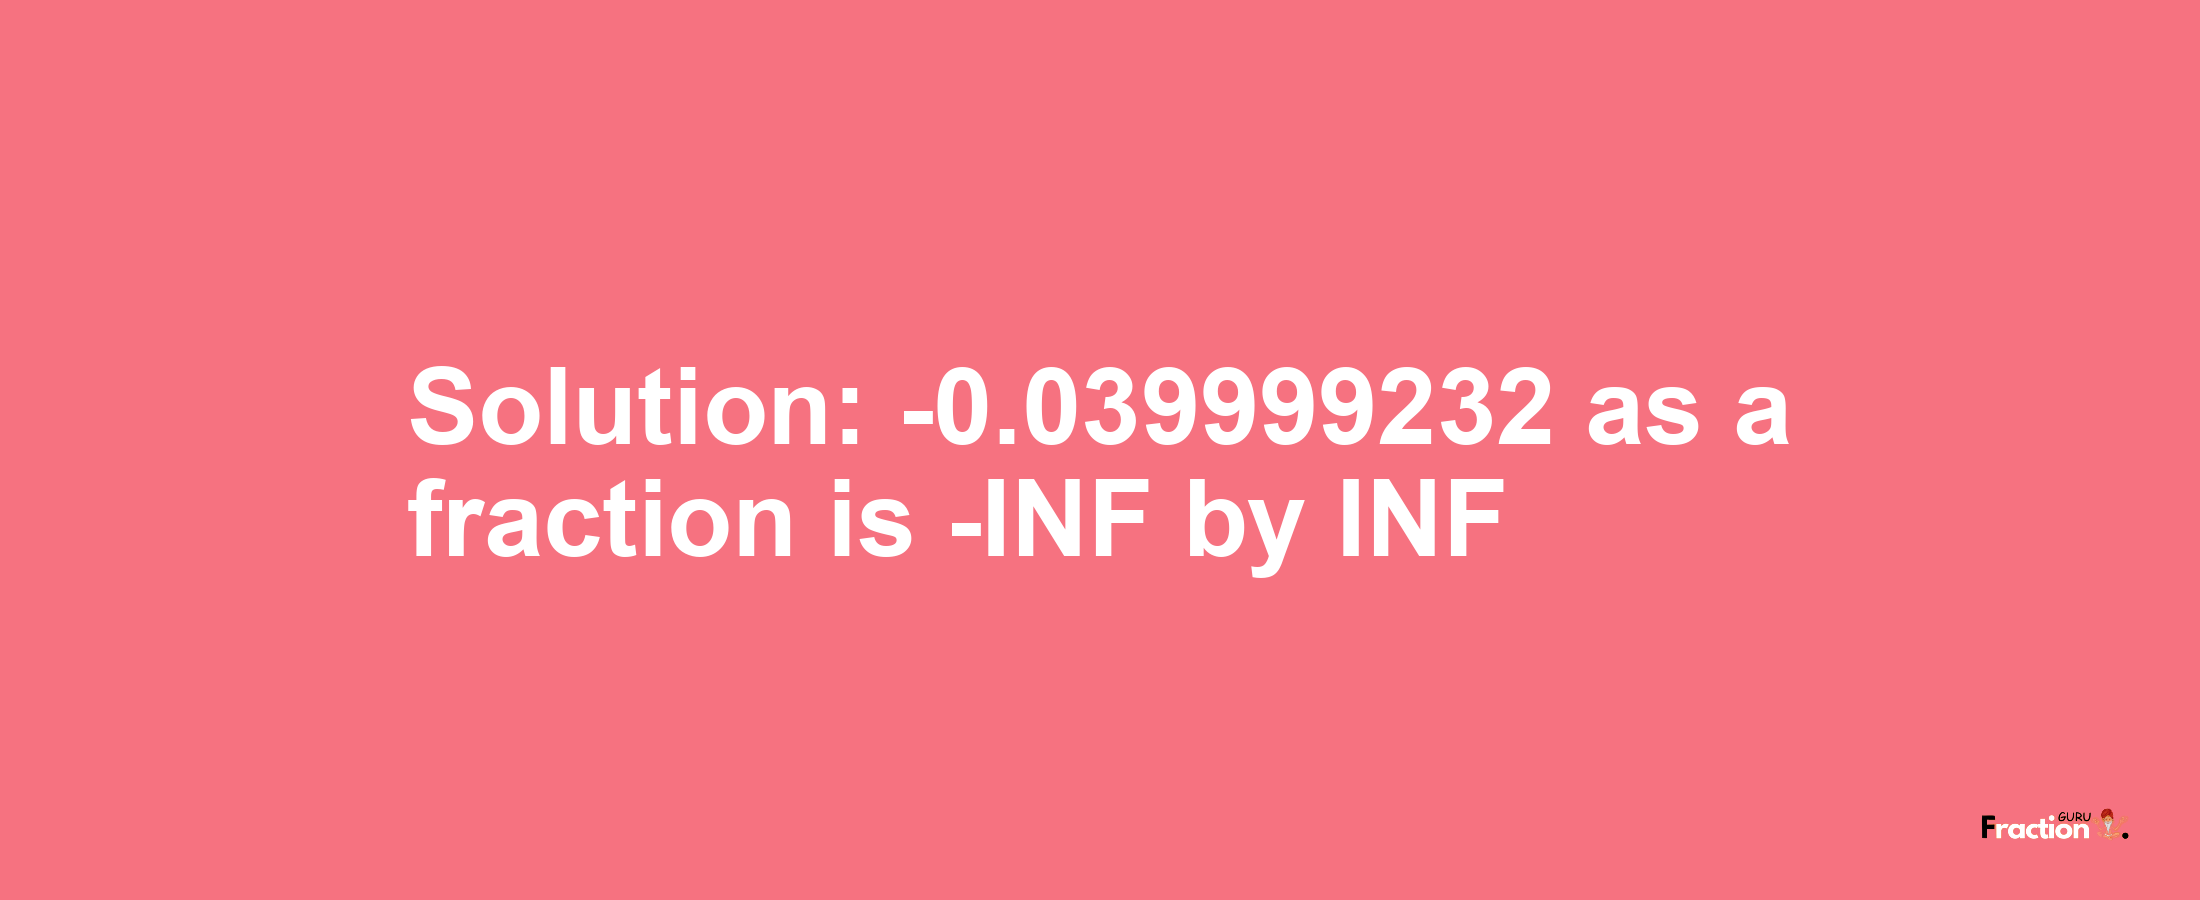 Solution:-0.039999232 as a fraction is -INF/INF